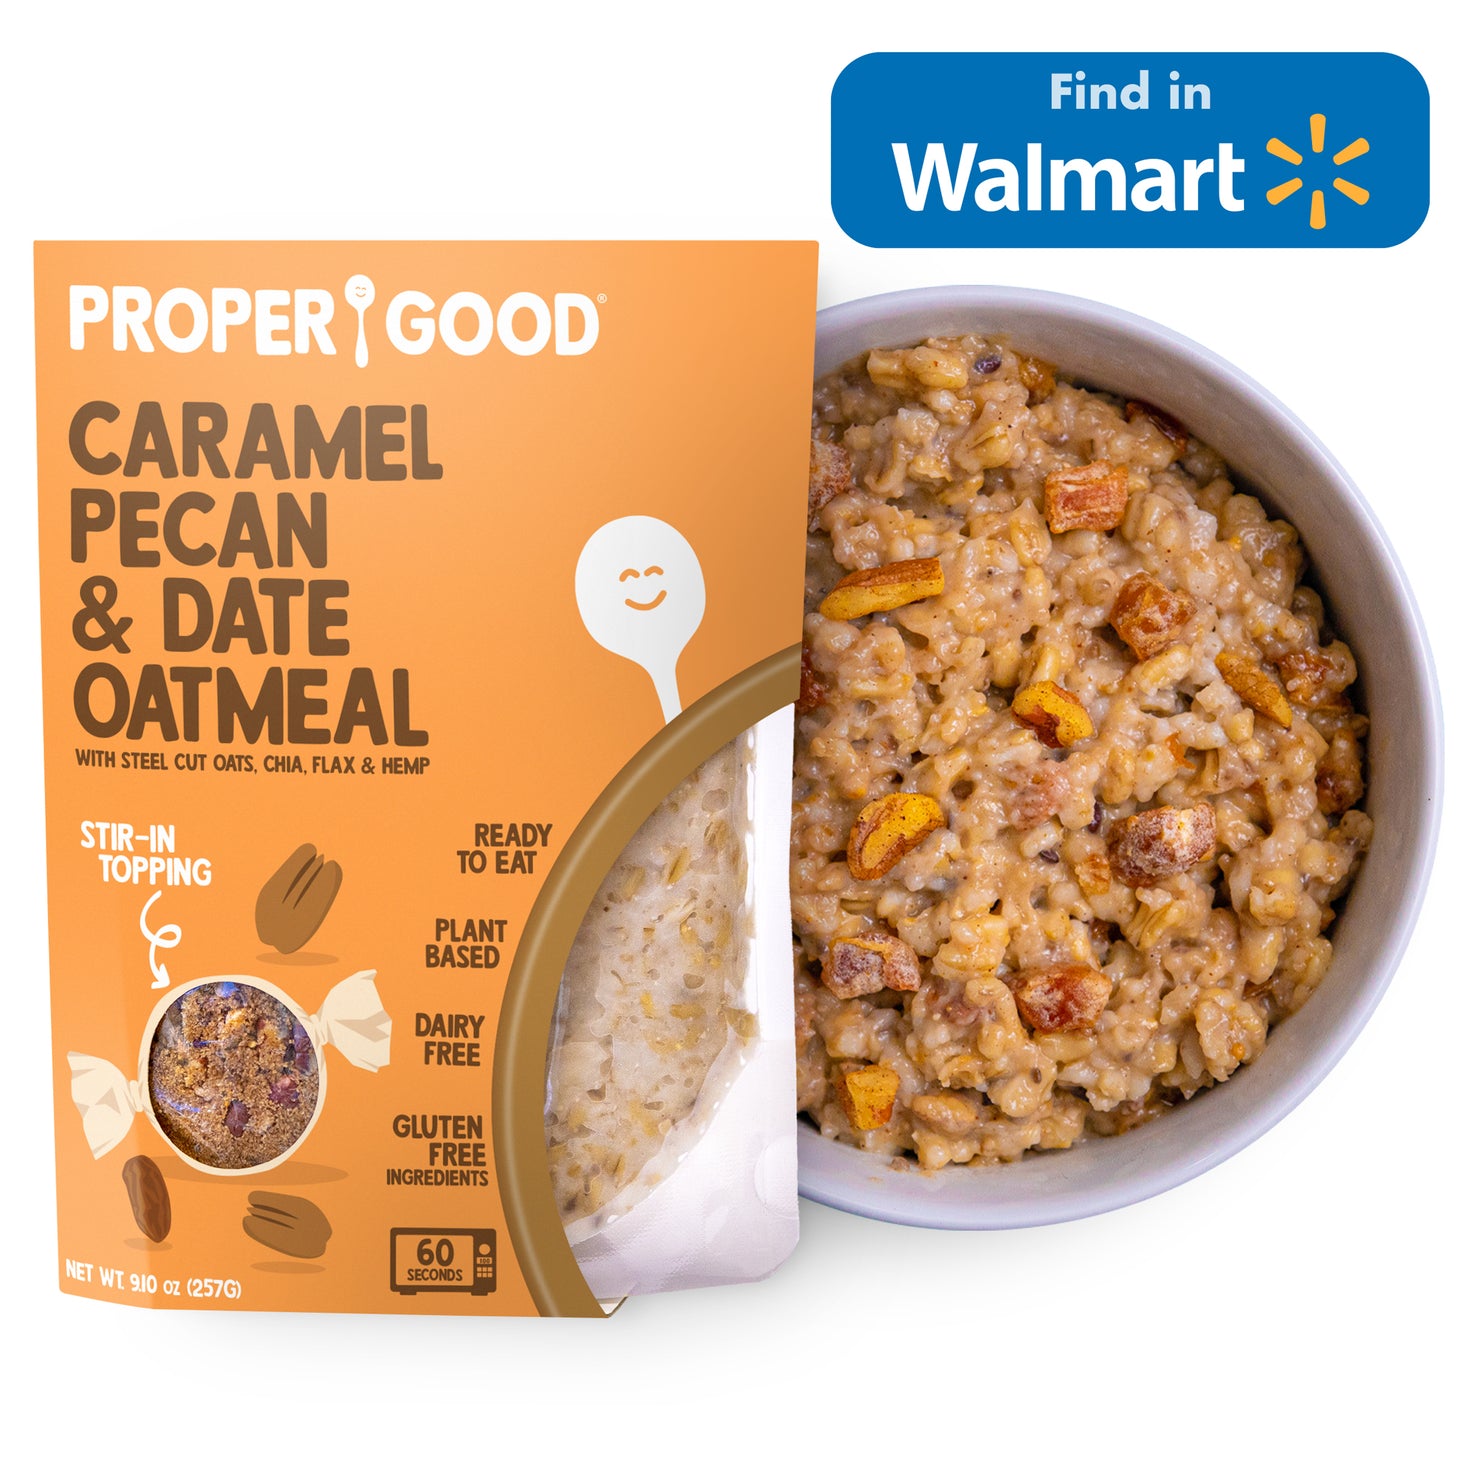 Caramel Pecan & Date Oatmeal in Bowl and in Pouch - Find in Walmart - Eat Proper Good